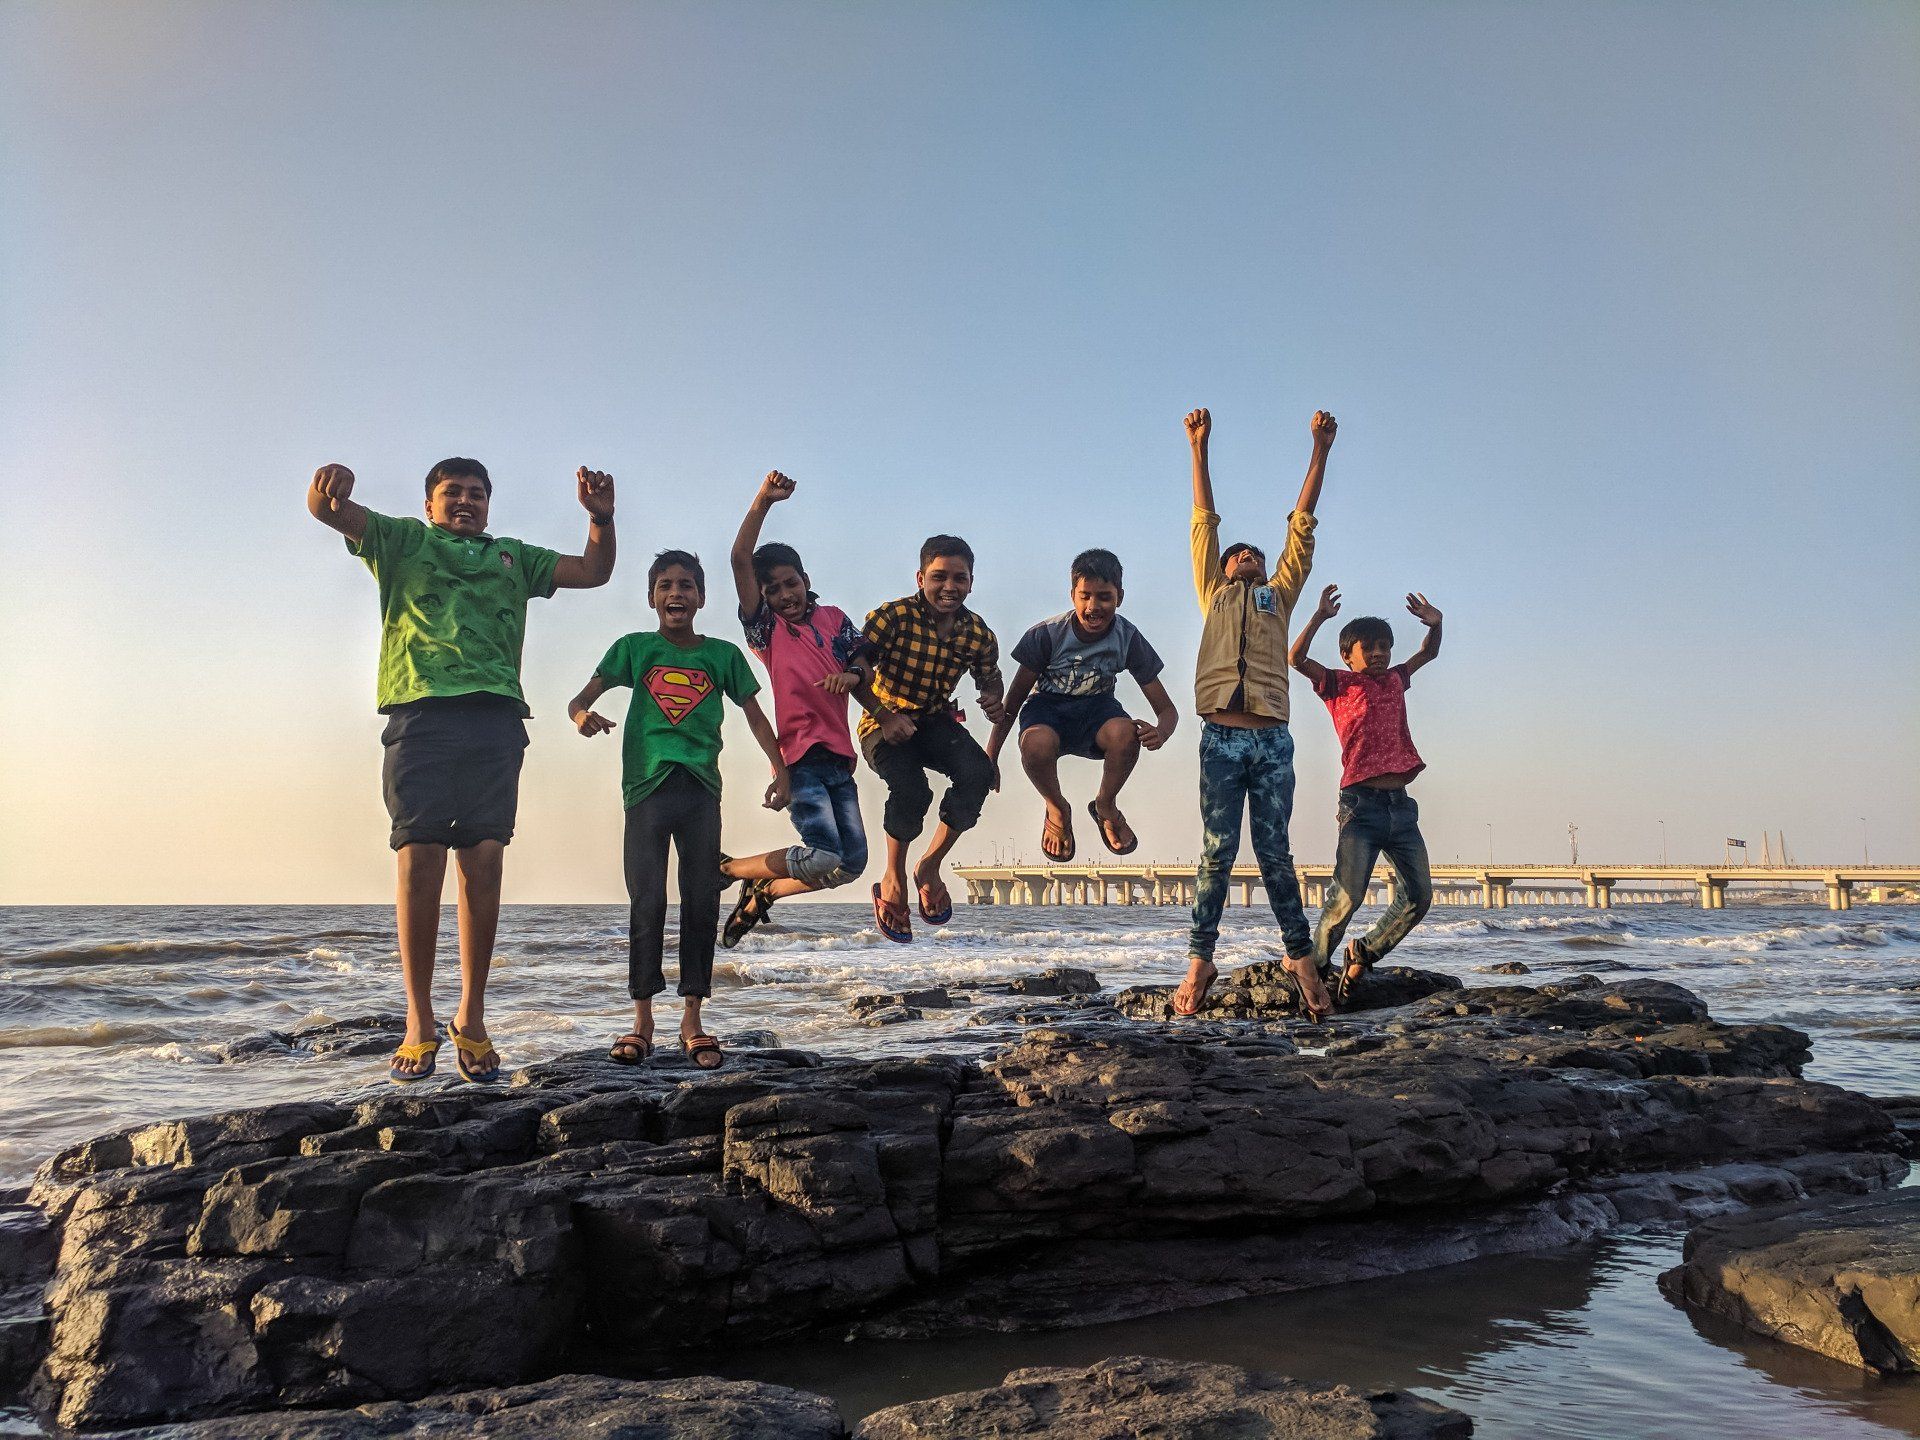 a group of children are jumping in the air on a rocky beach .